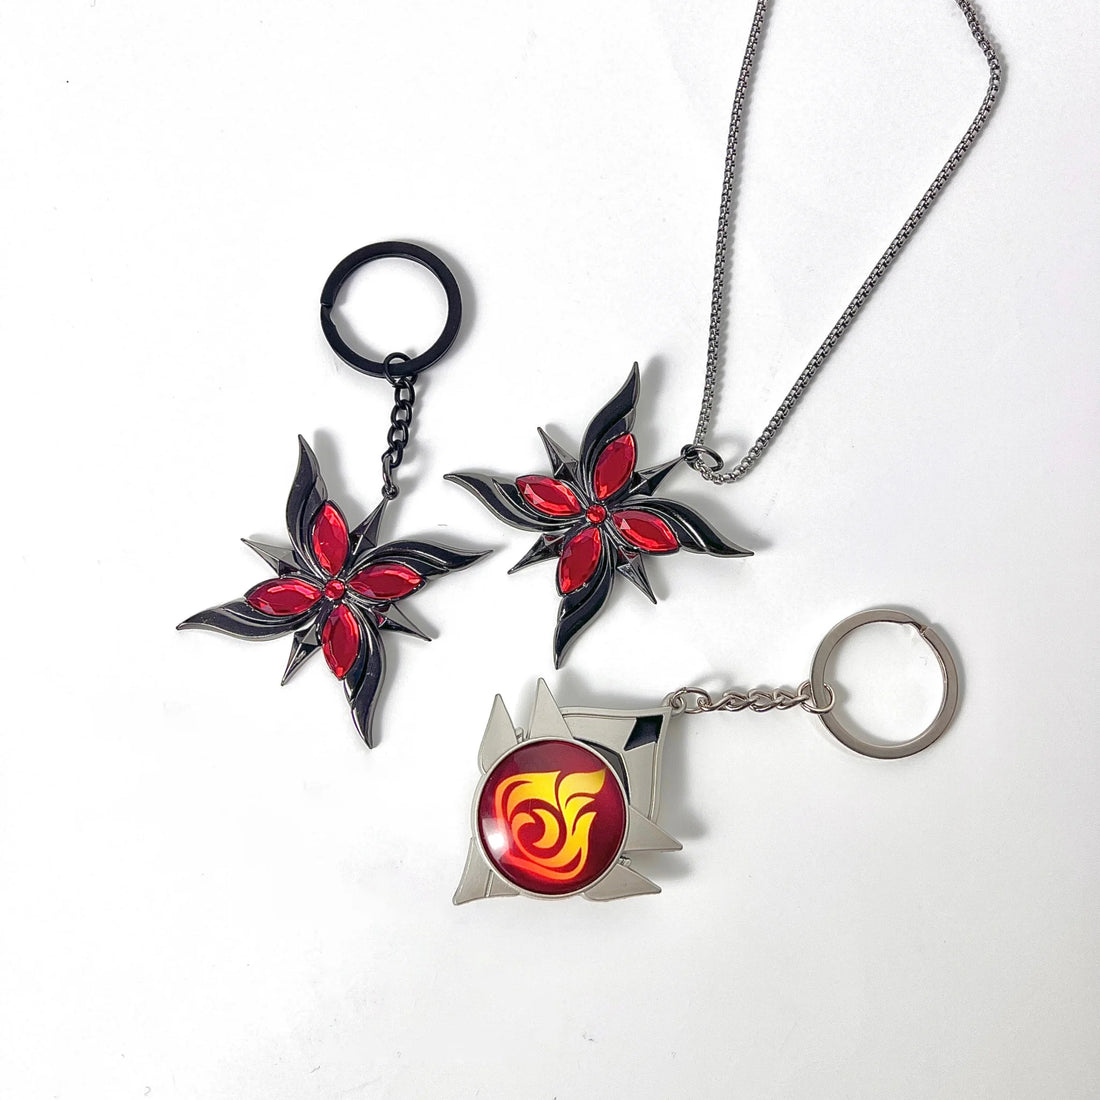 Genshin Impact Character The Knave Arlecchino Vision Keychain Necklace 3 Pcs Whole Set 钥匙扣